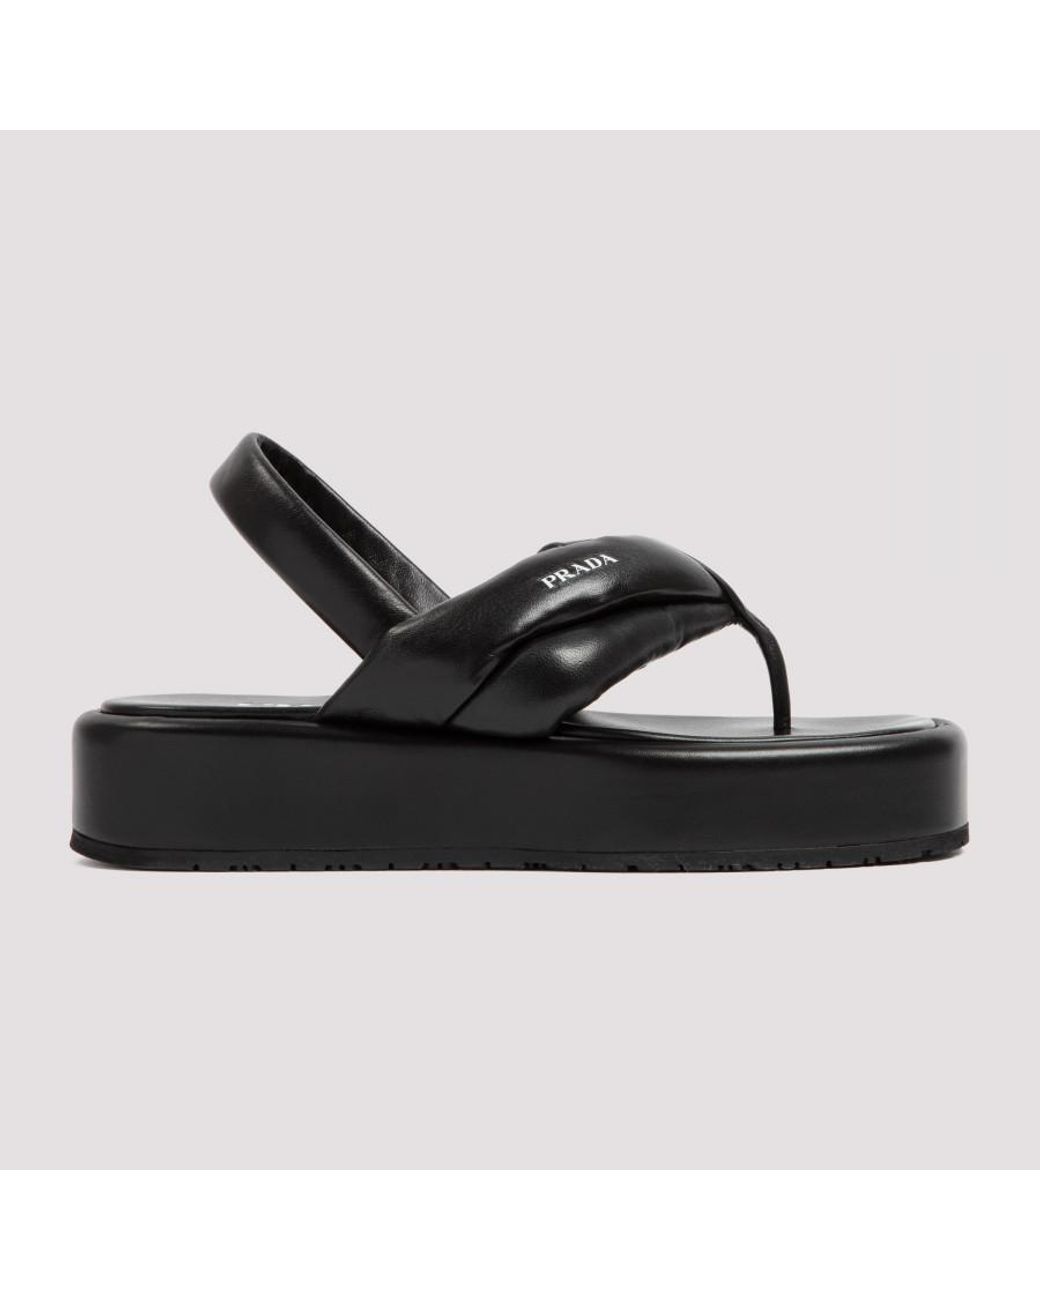 Prada Leather Shoes 36+ in Black - Lyst